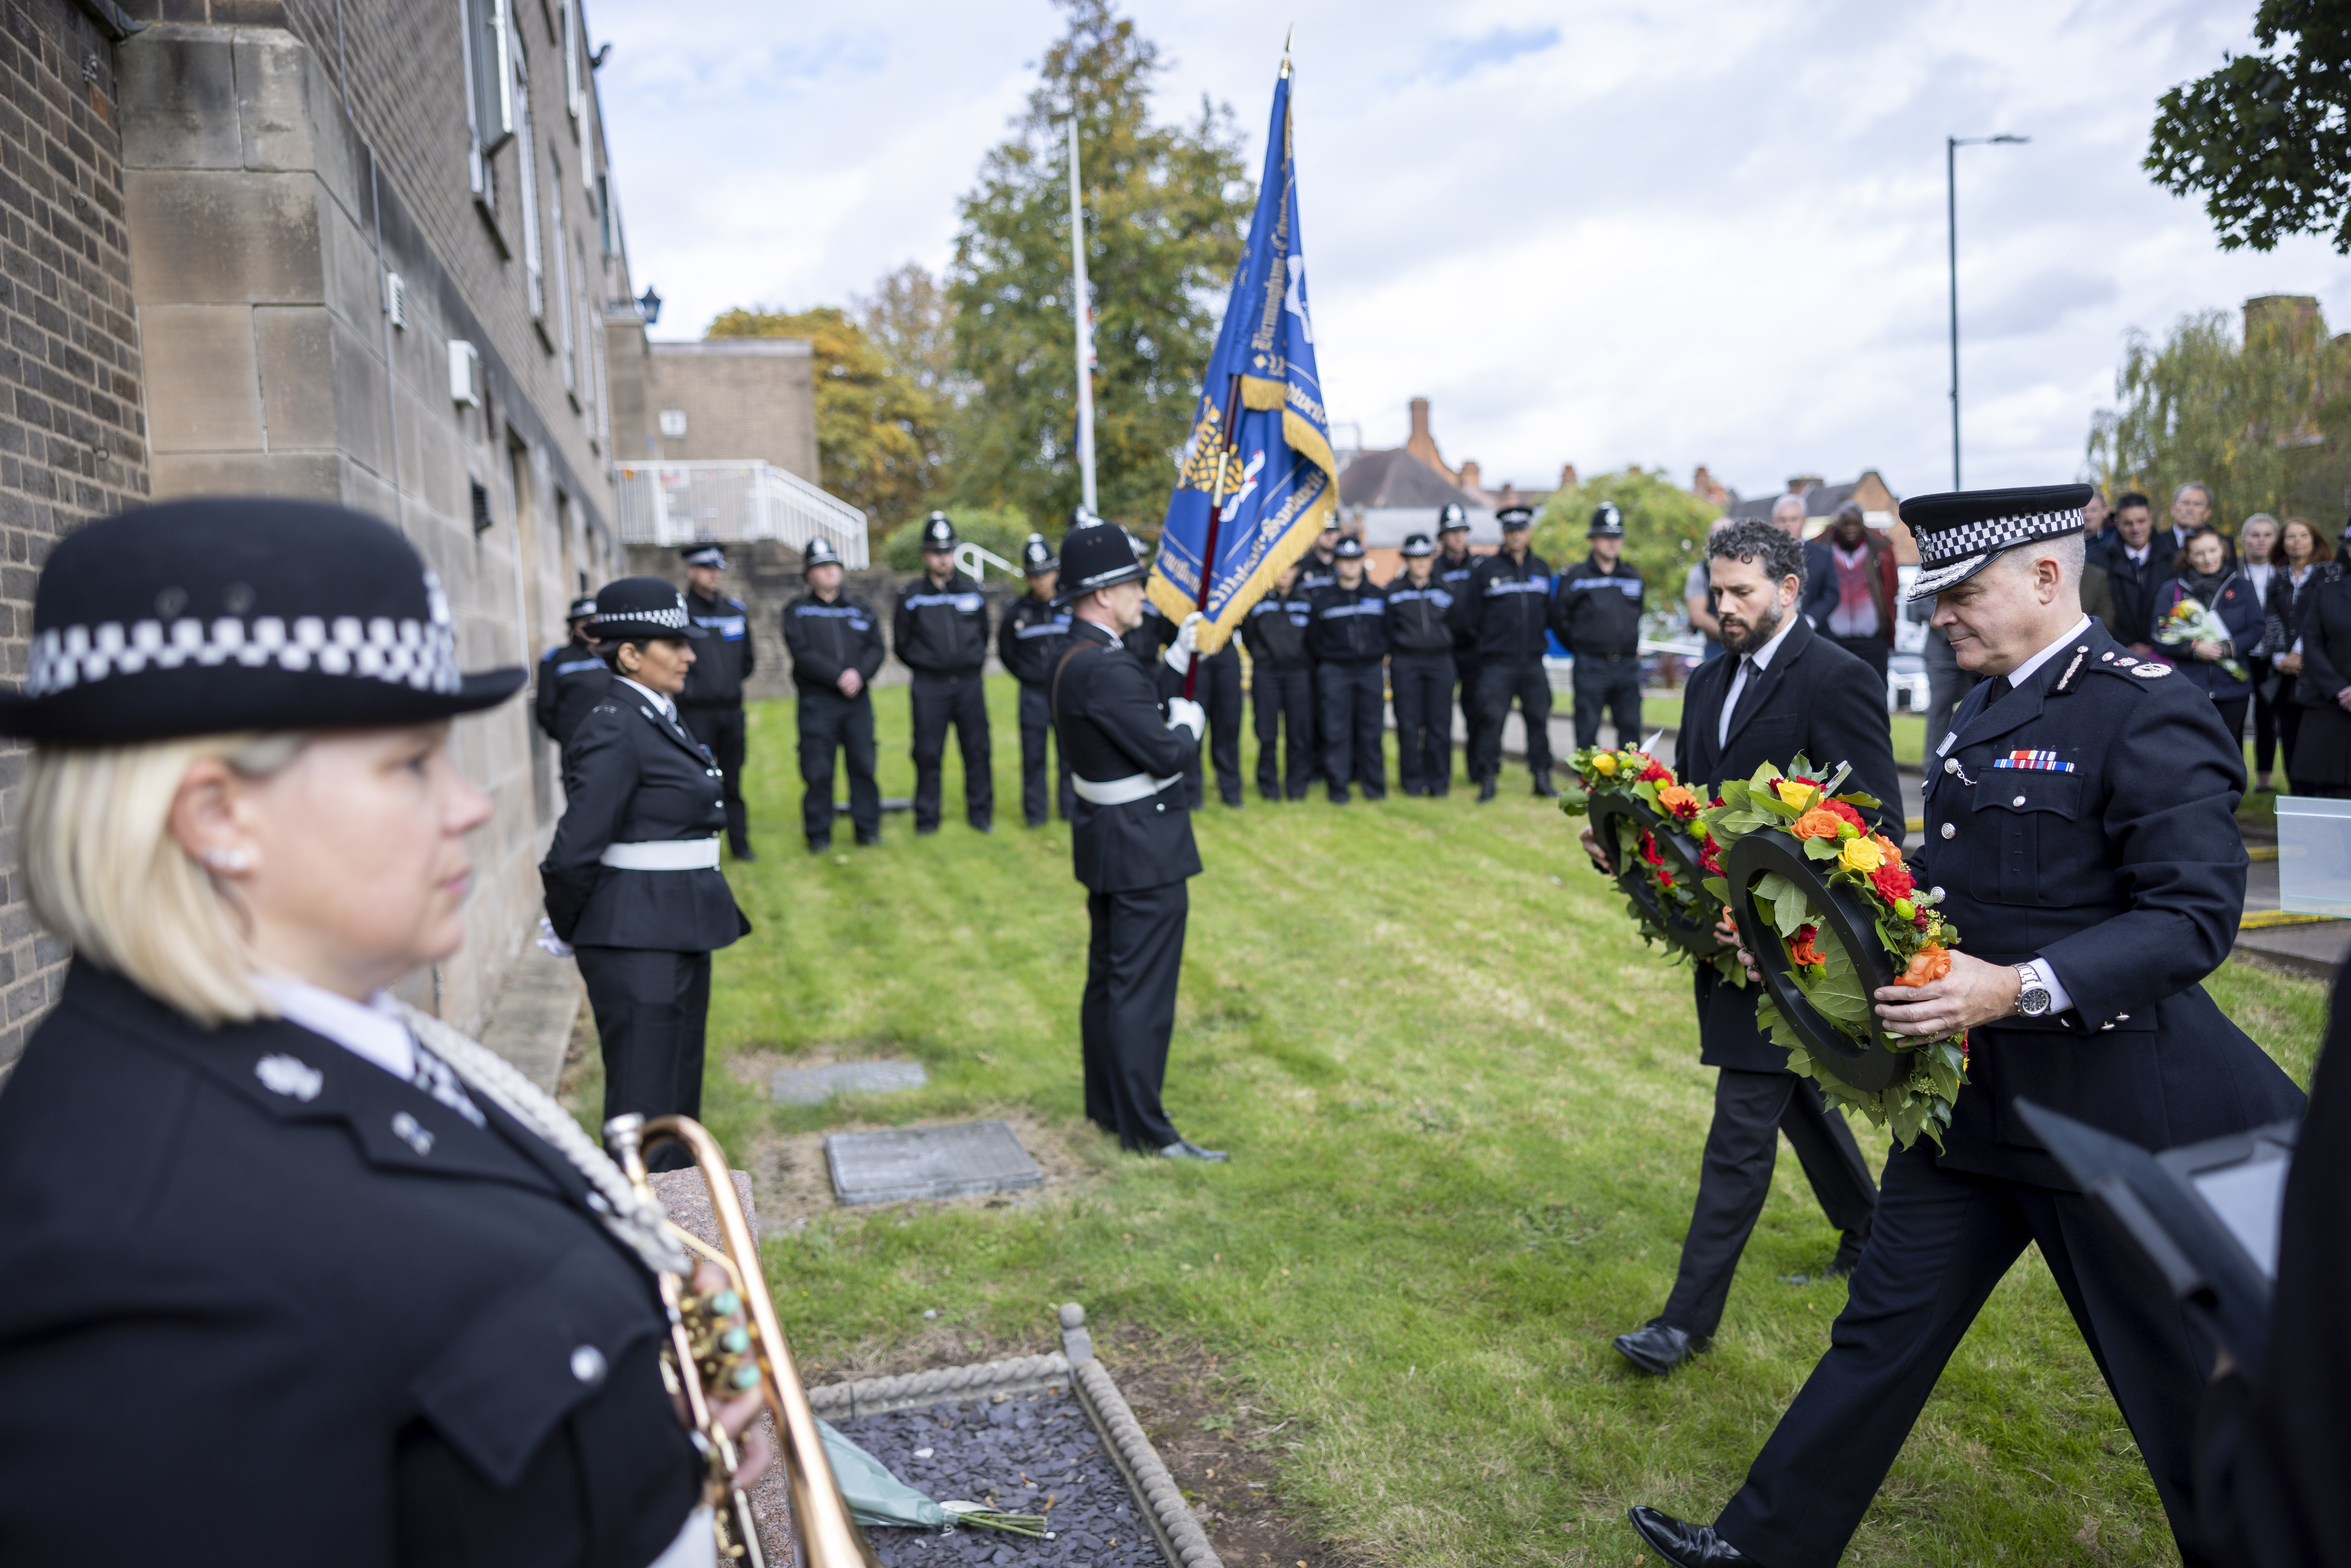 The Chief and assistant PCC lay wreaths.